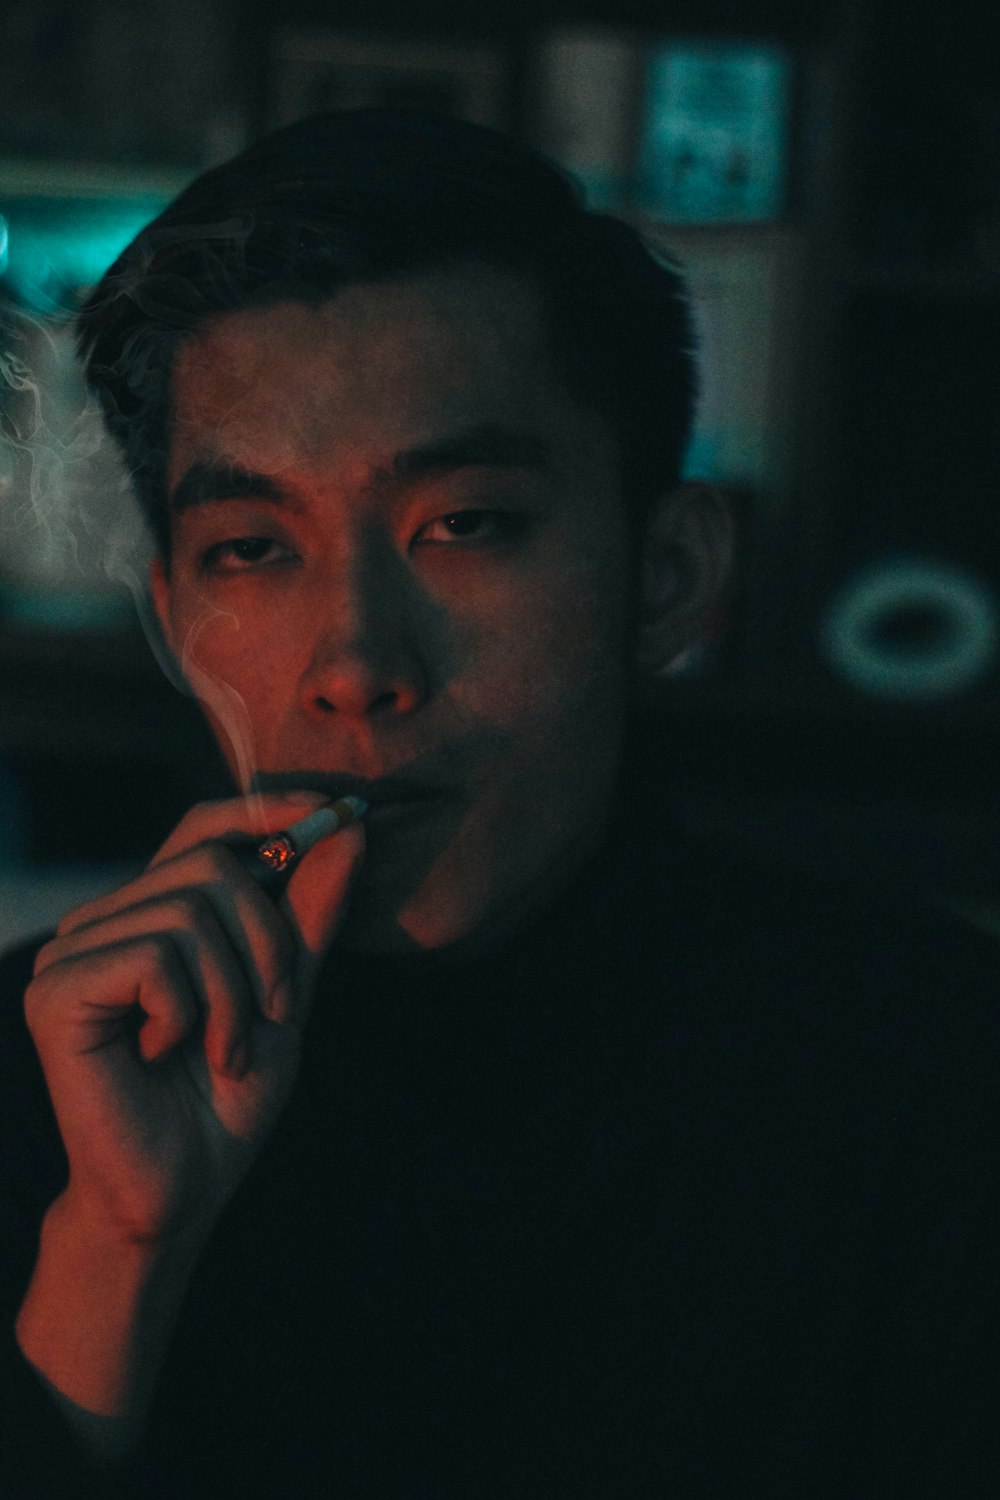 person having a cigarette close-up photography